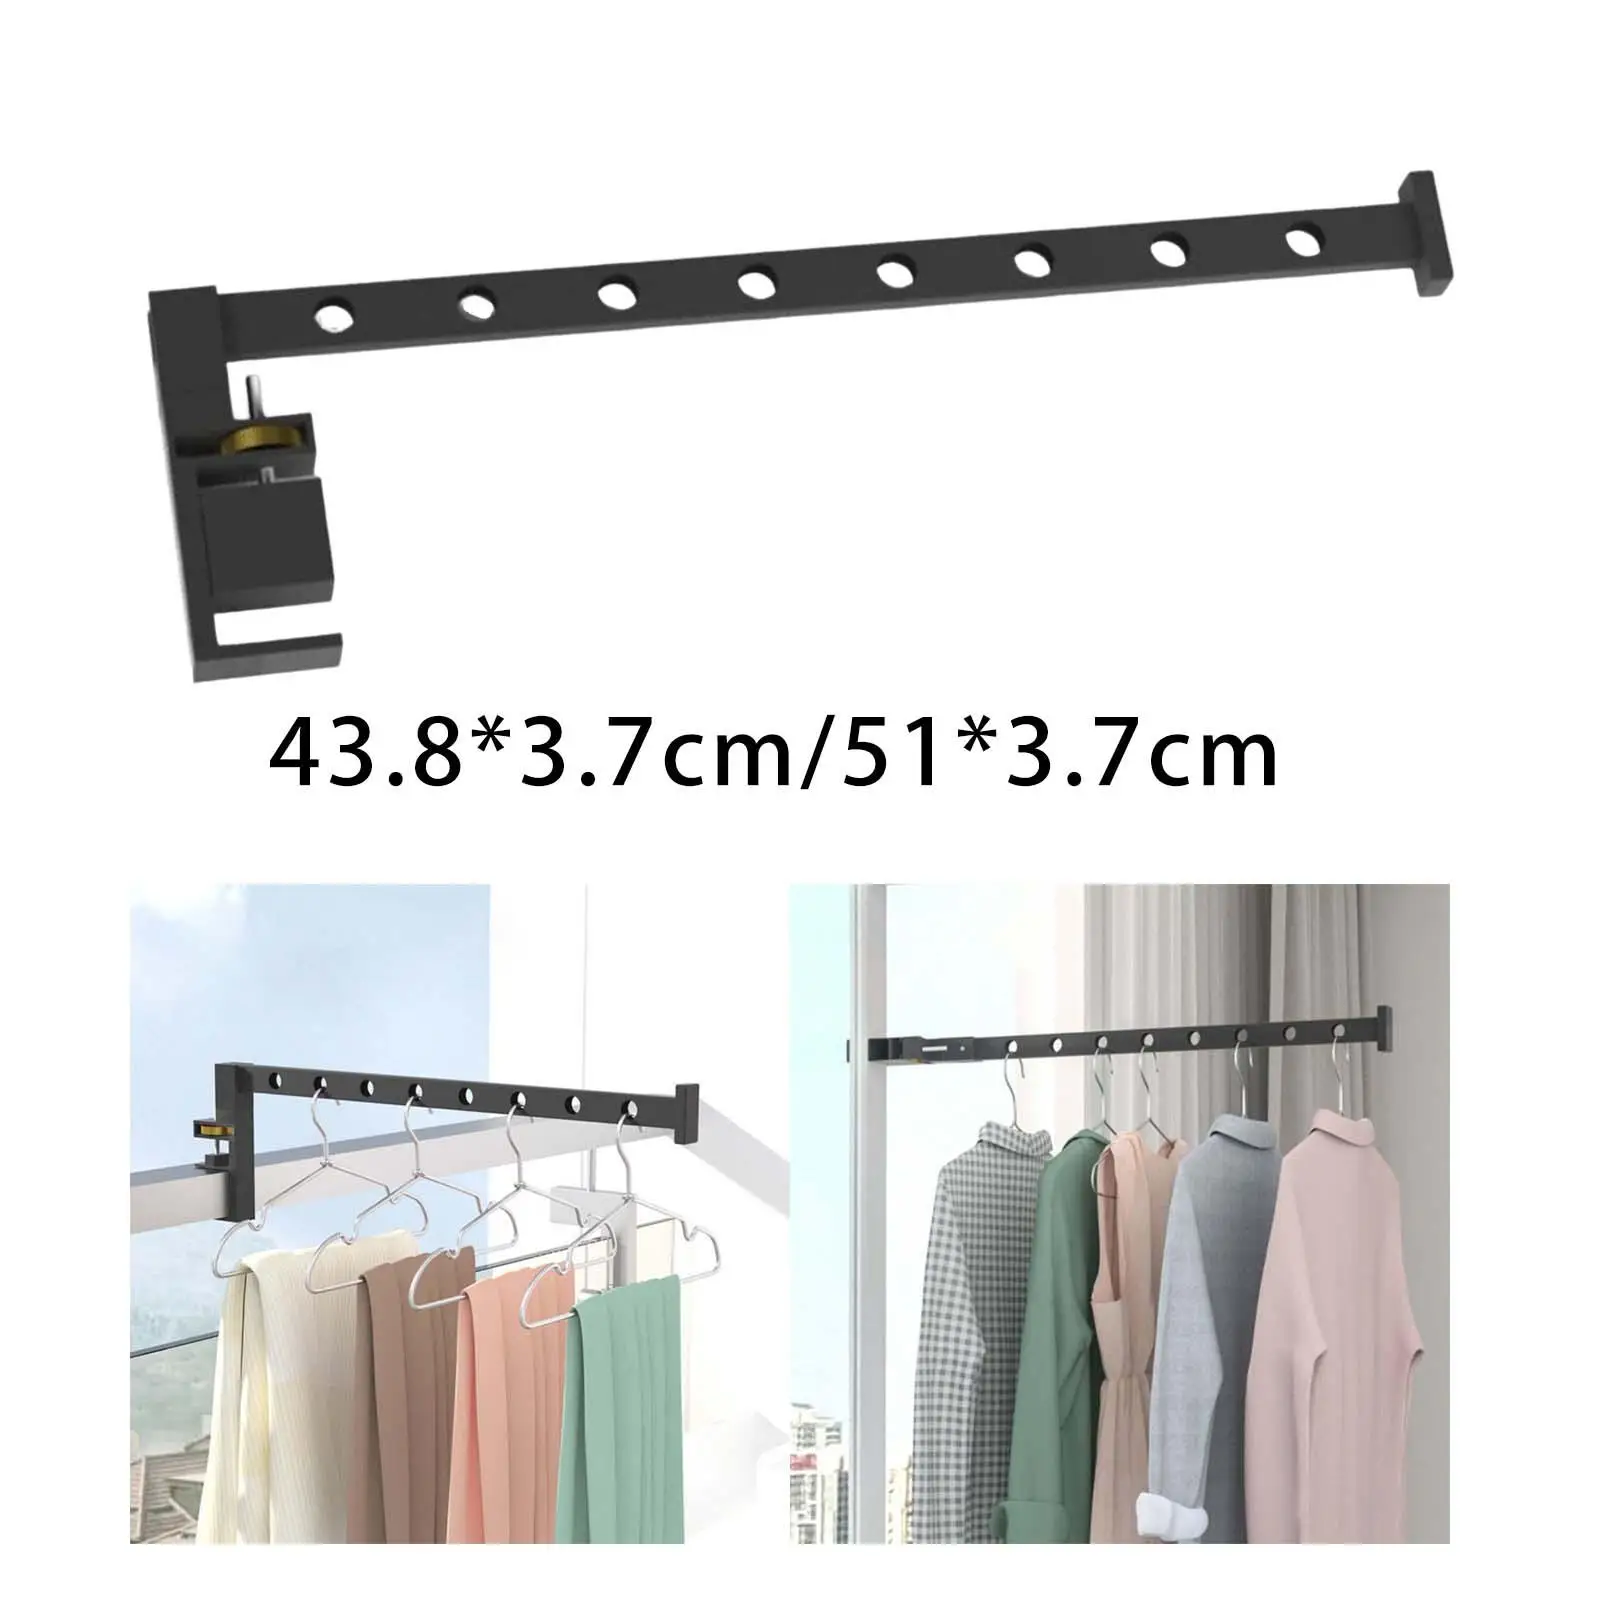 Folding Clothes Hanger Durable Punch Free Large Space Wall Mounted Clothes Hanger for Window Wall Trousers Kids Clothes Jackets